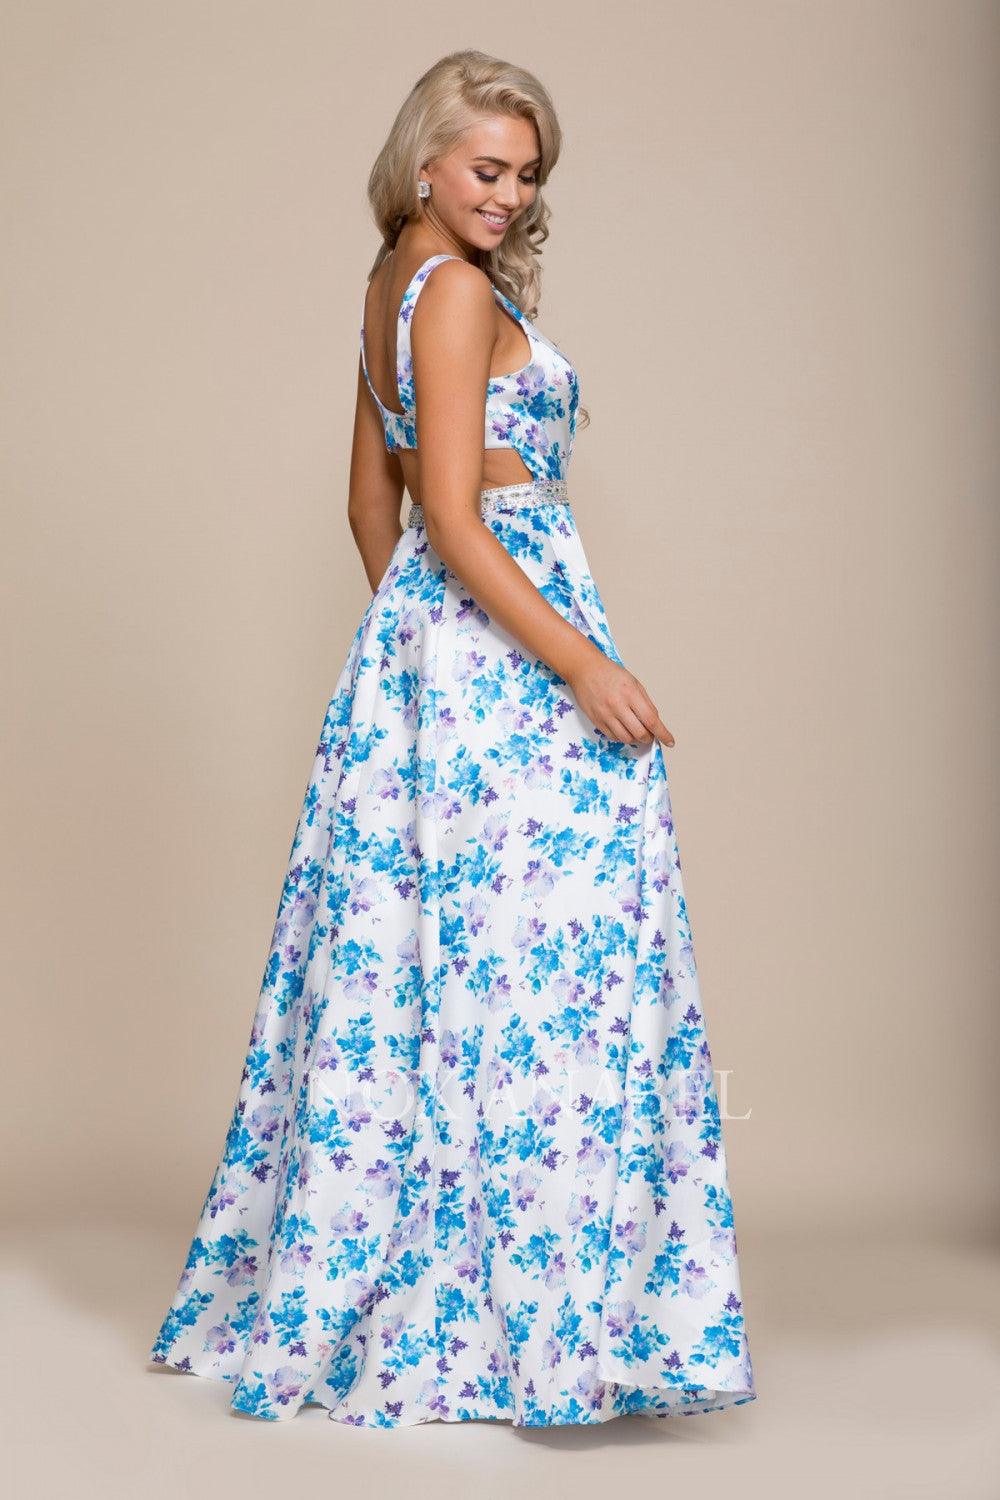 Long Floral Prom Dress Formal Gown - The Dress Outlet Nox Anabel